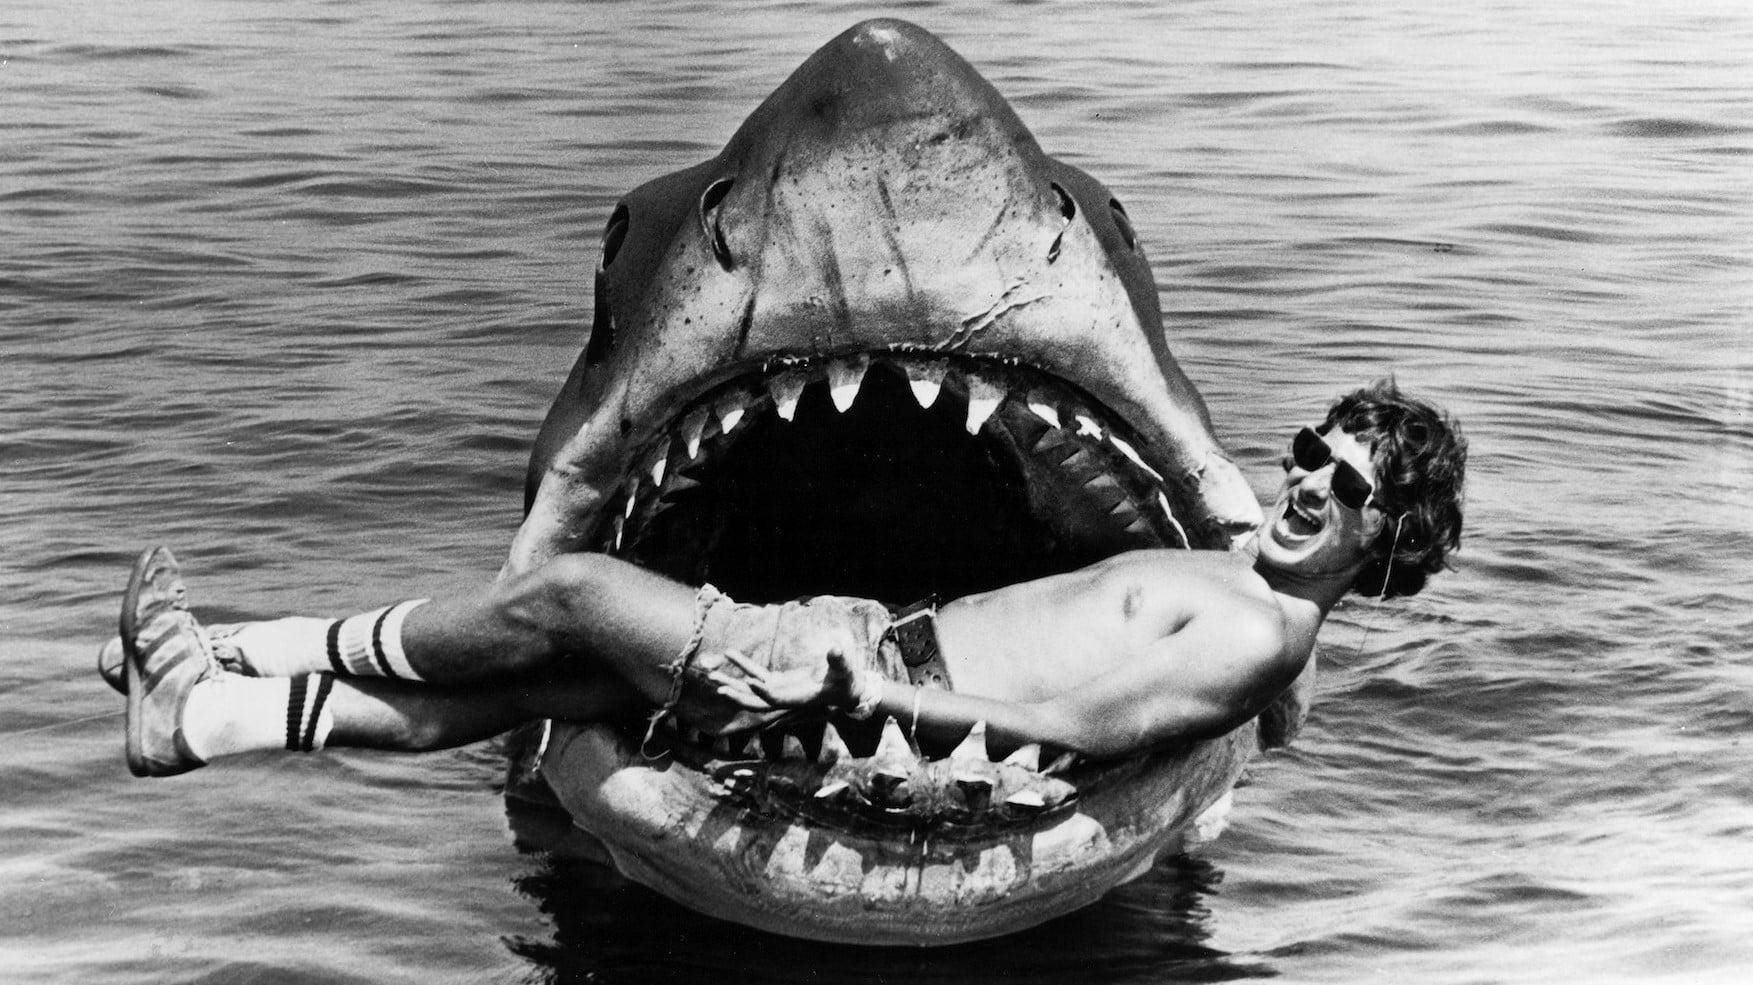 The Making of 'Jaws' backdrop